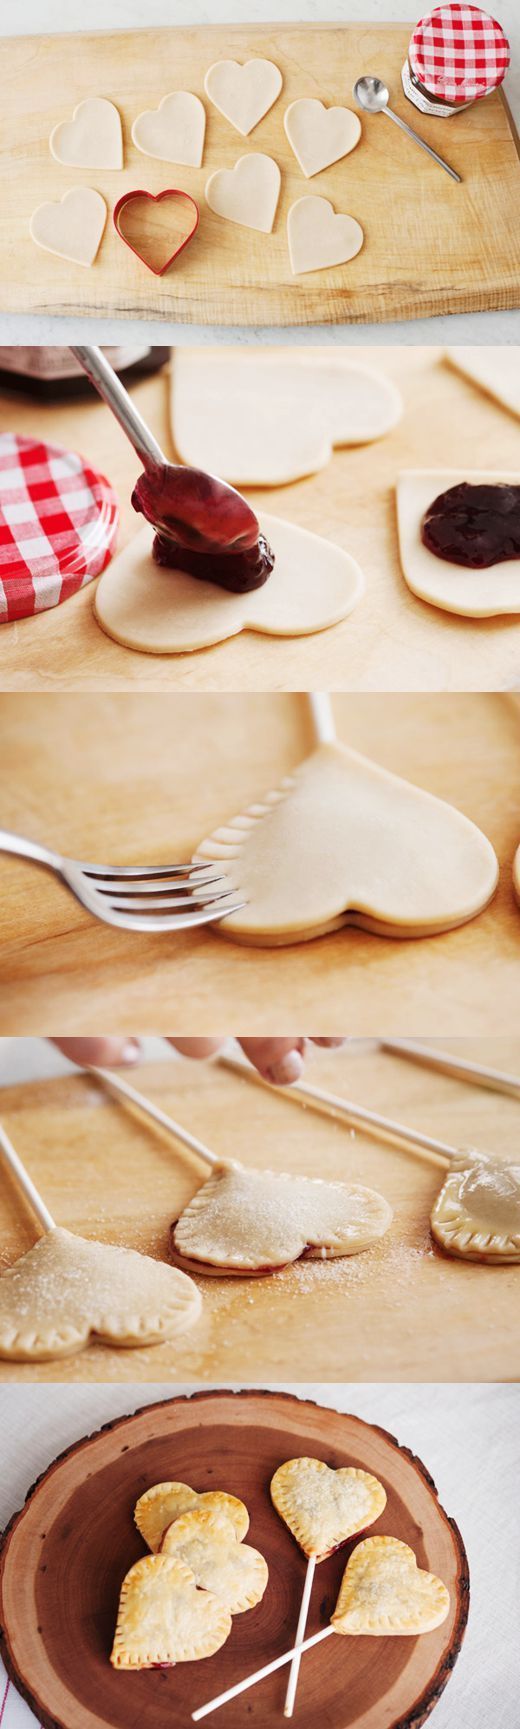 DIY Heart Shaped Valentine Cake Pops Tried last year and it was wonderful.